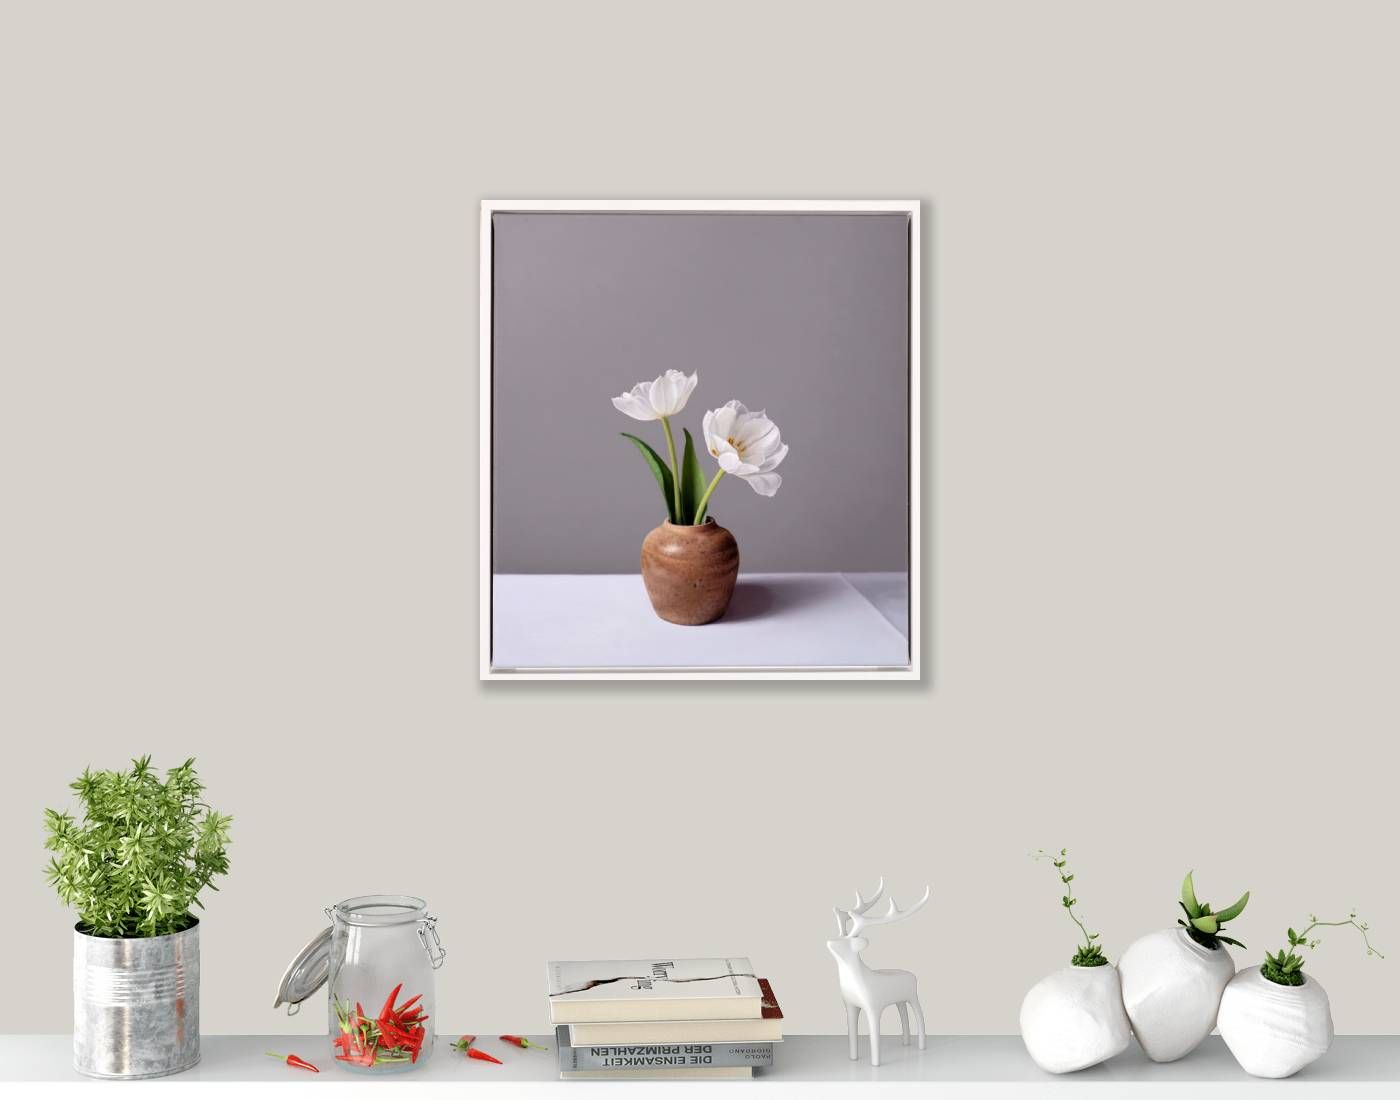 Still Life with White Tulips and Earthenware Pot  by Jo Barrett